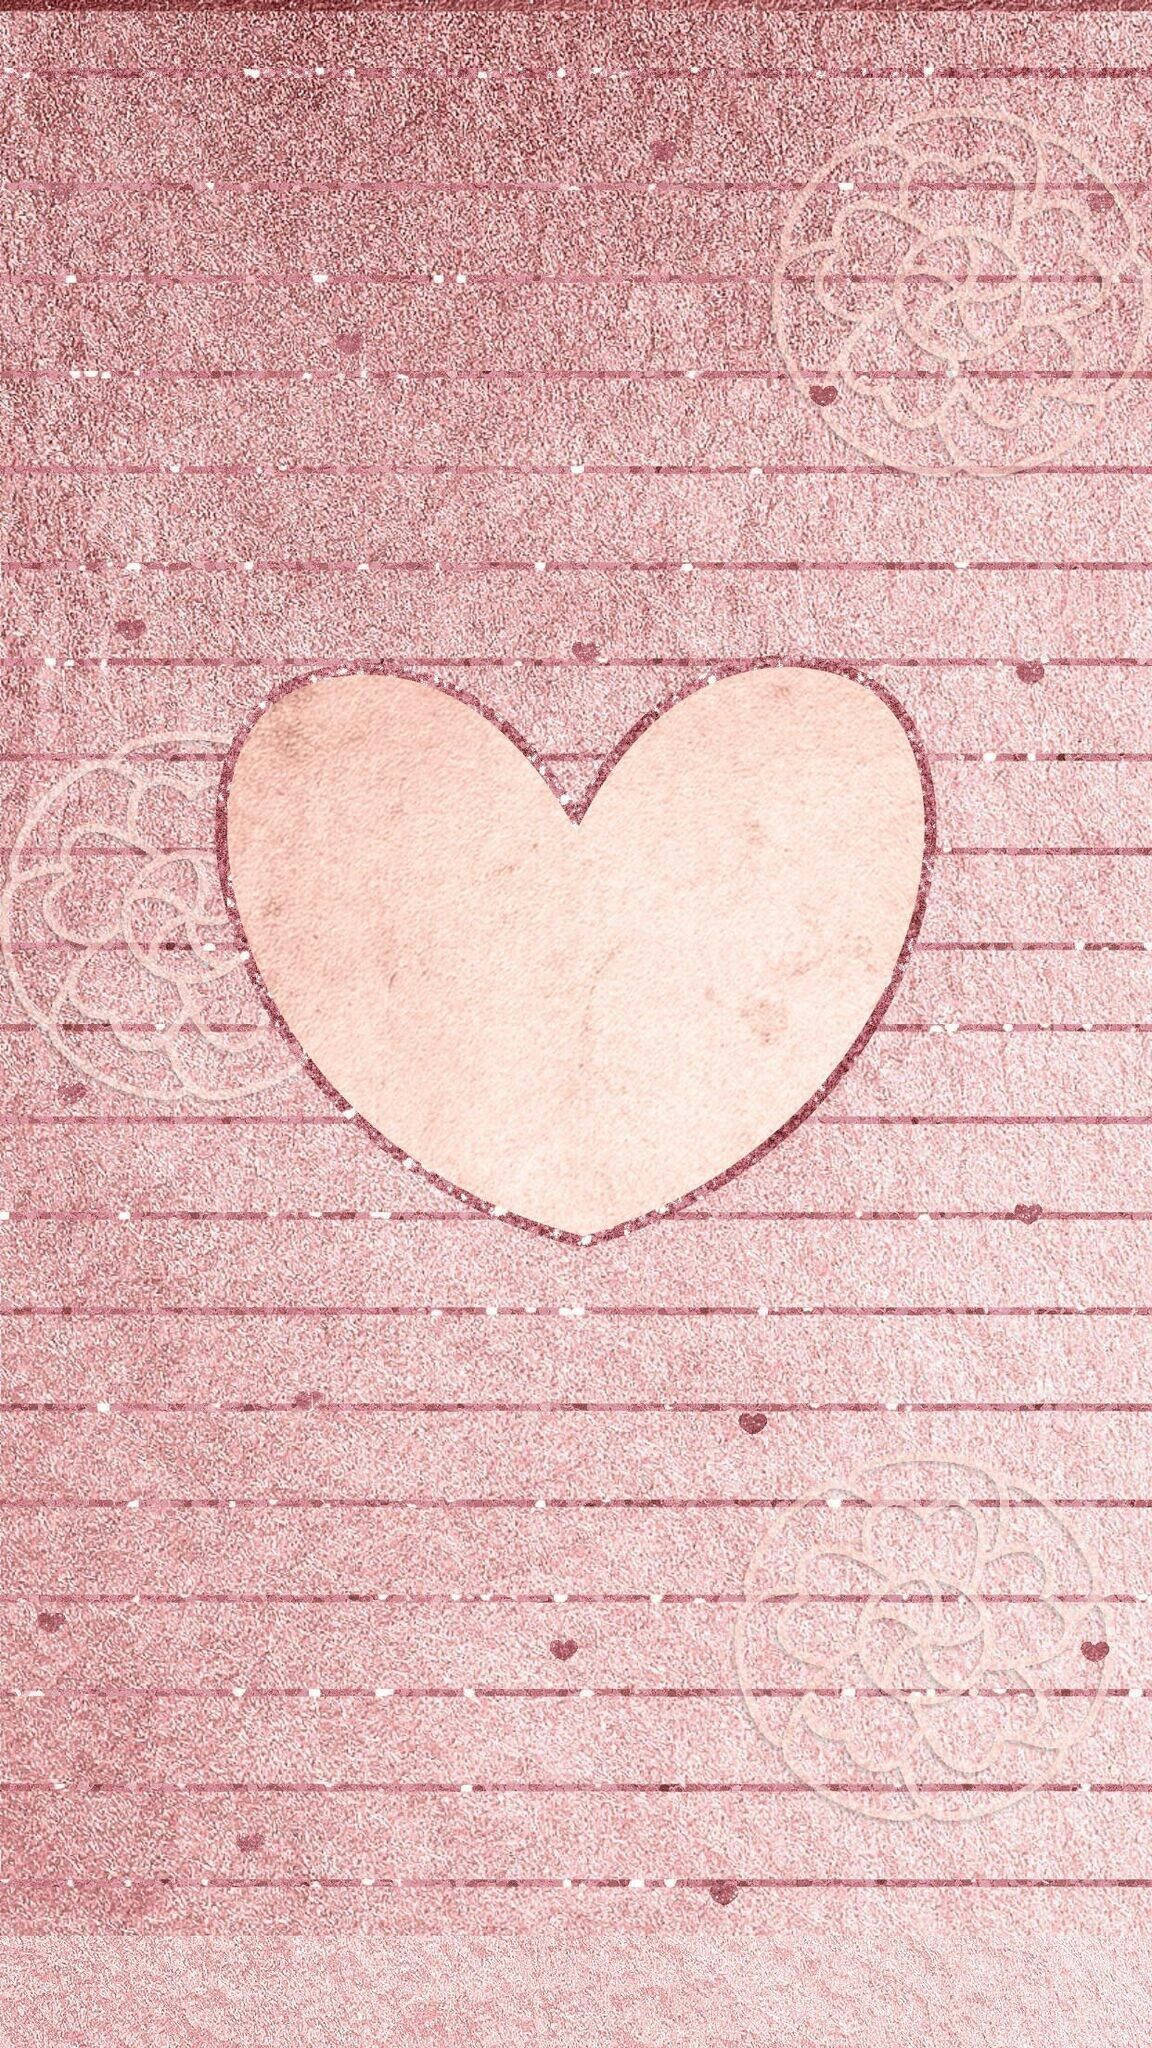 Wall Heart For Cute Girly Phone Background